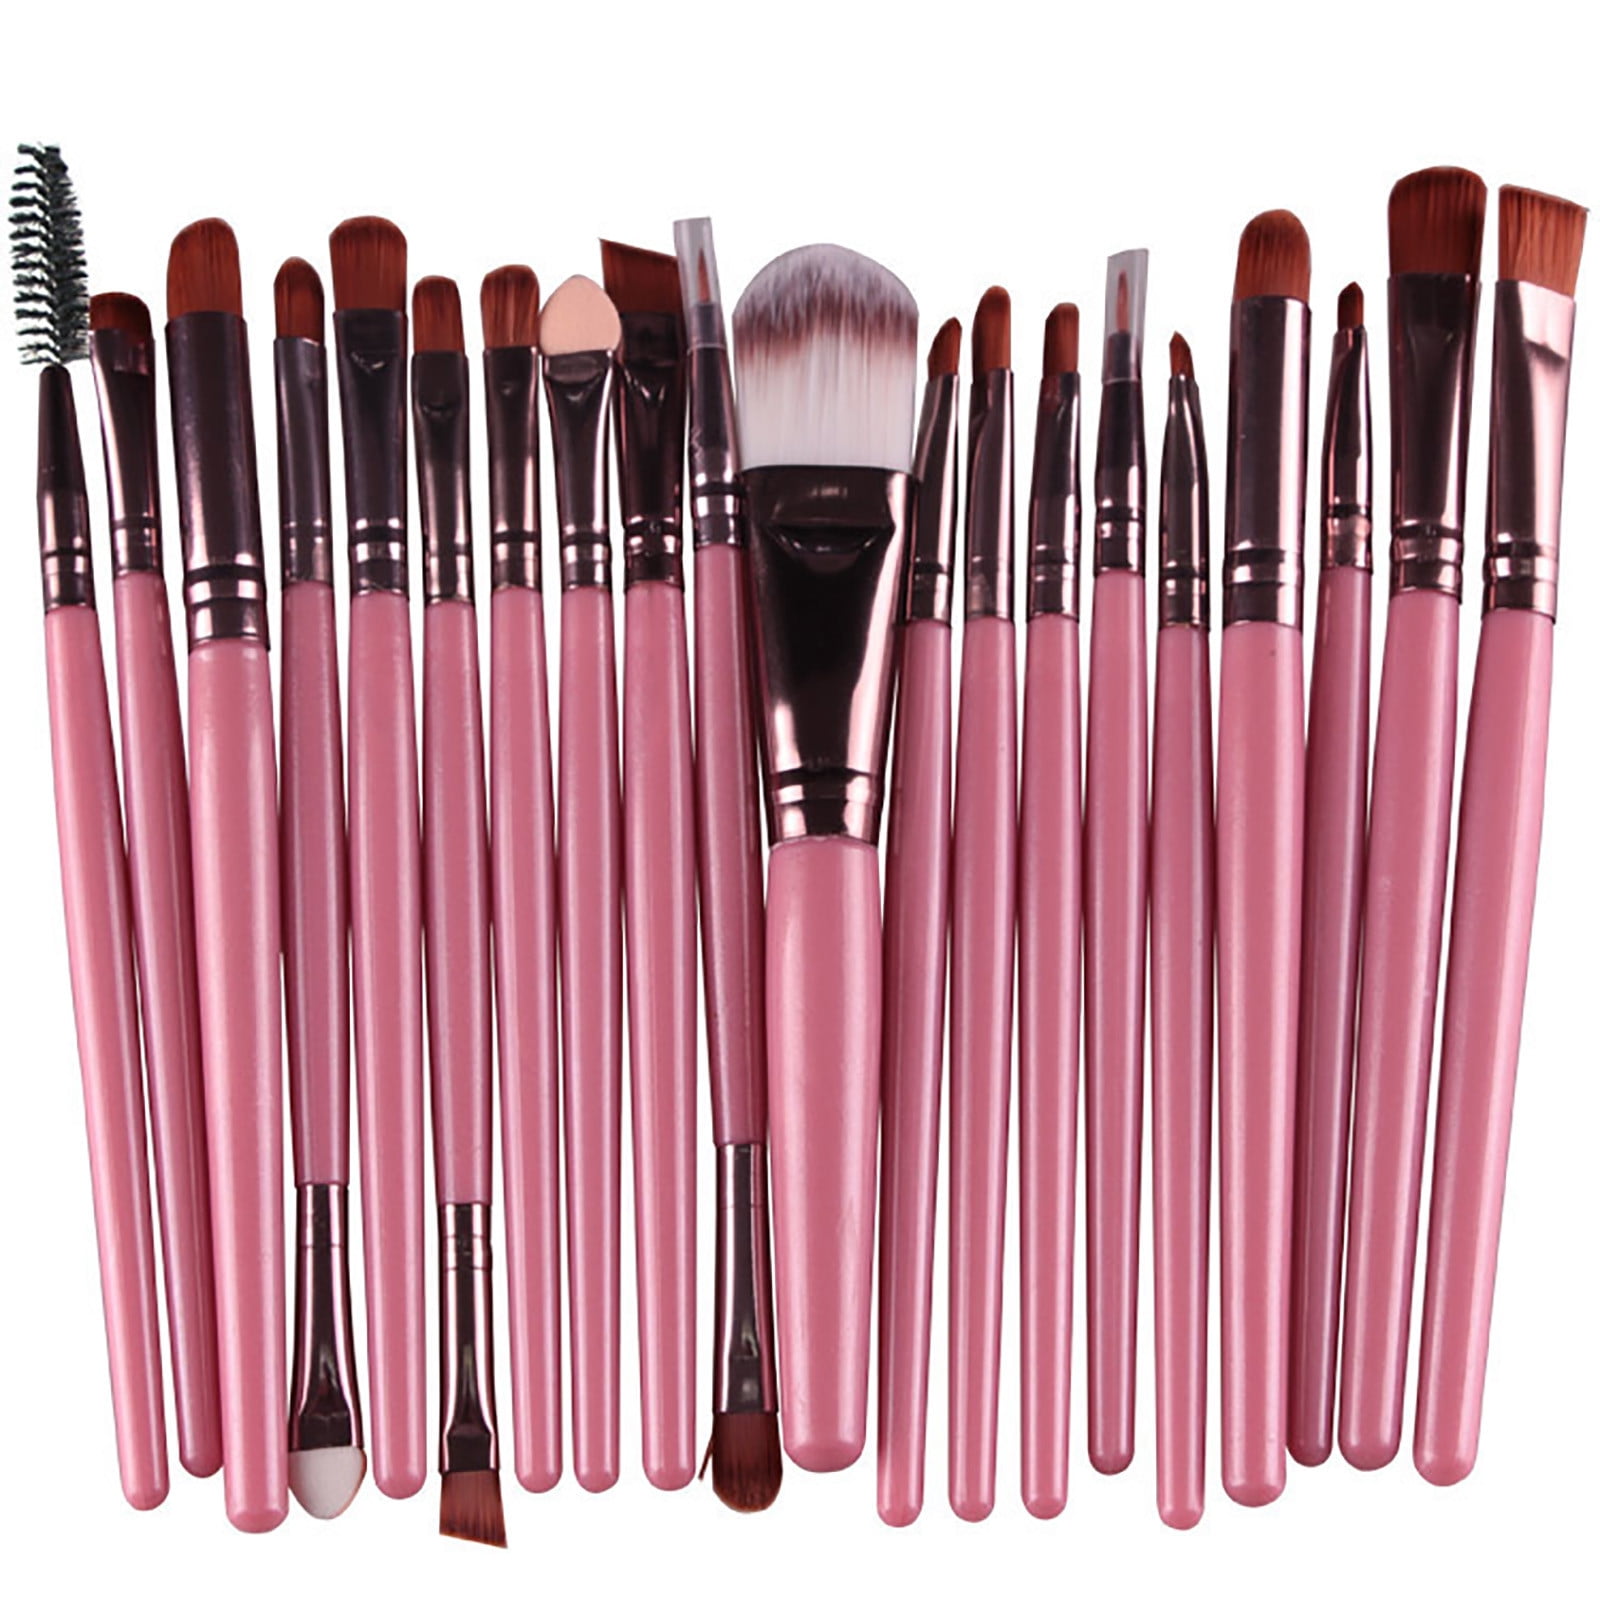 20pcs Makeup Brush Sets, Make Up Brushes for Teen Girls with Foundation ...